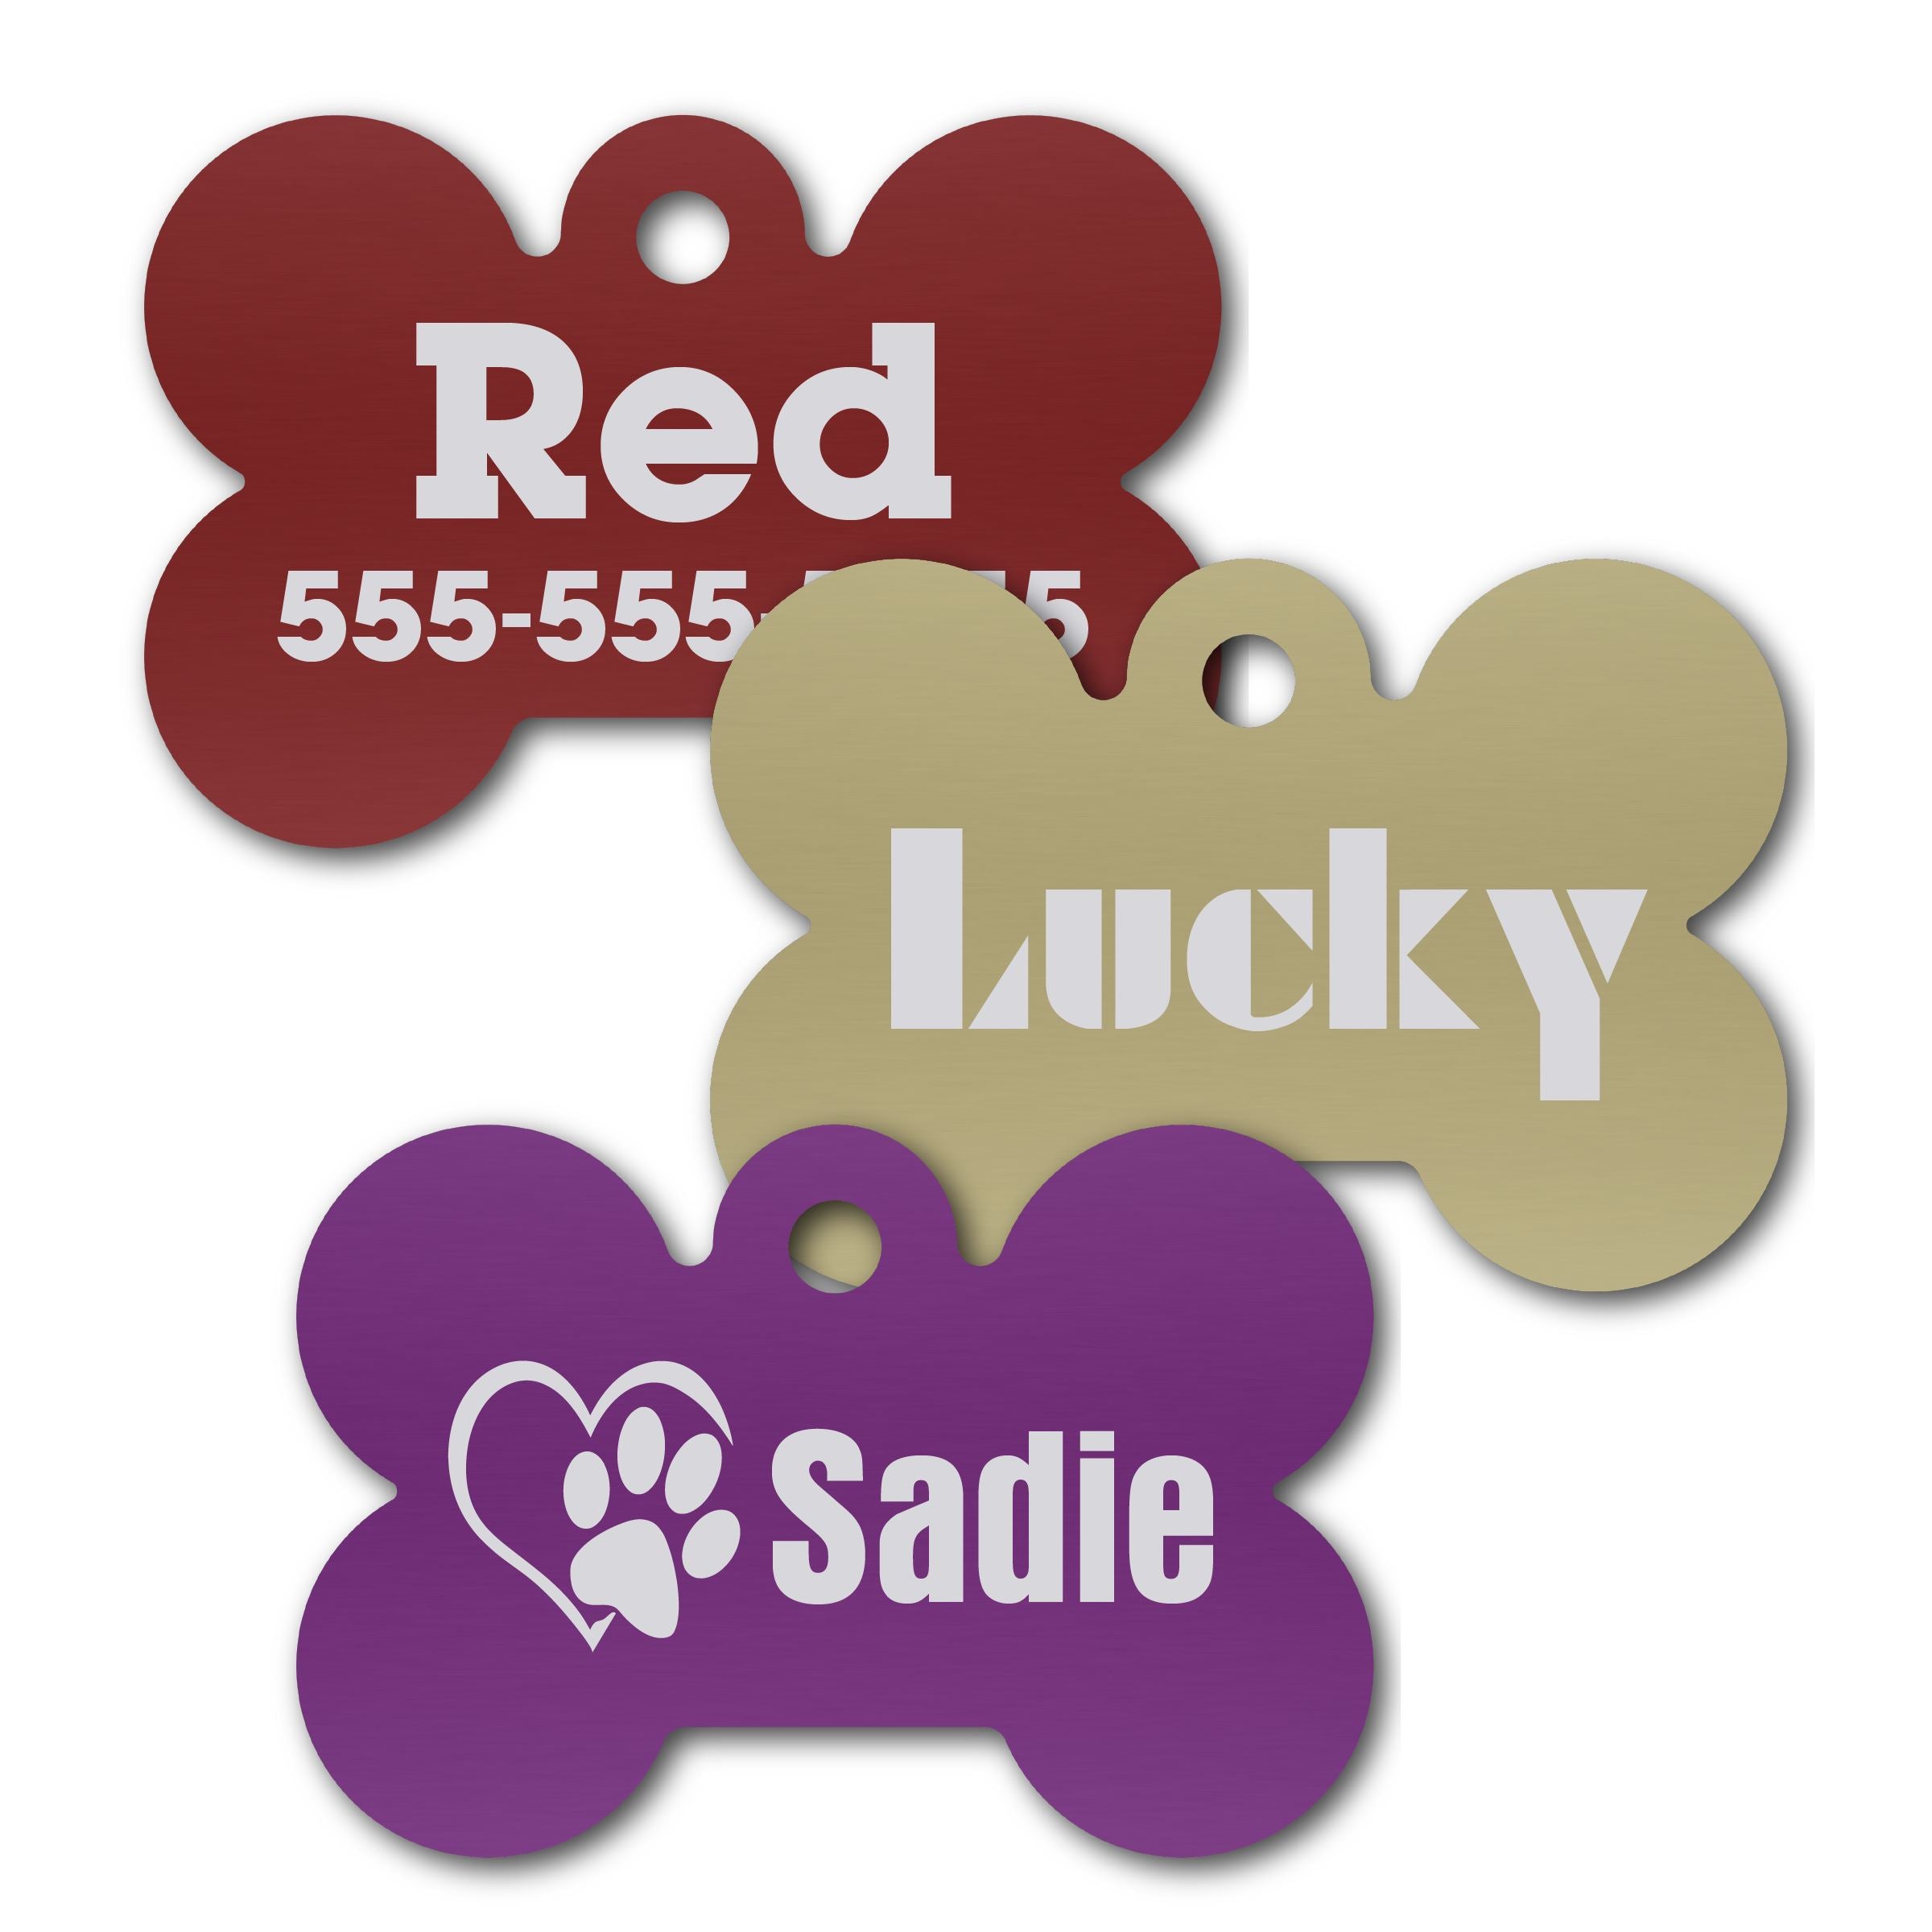 Anodized Aluminum Dog Bone Shaped Tags, 1-3/8" x 2-1/16" with 1/8" Hole, Laser Engraved Metal Tags Craftworks NW 